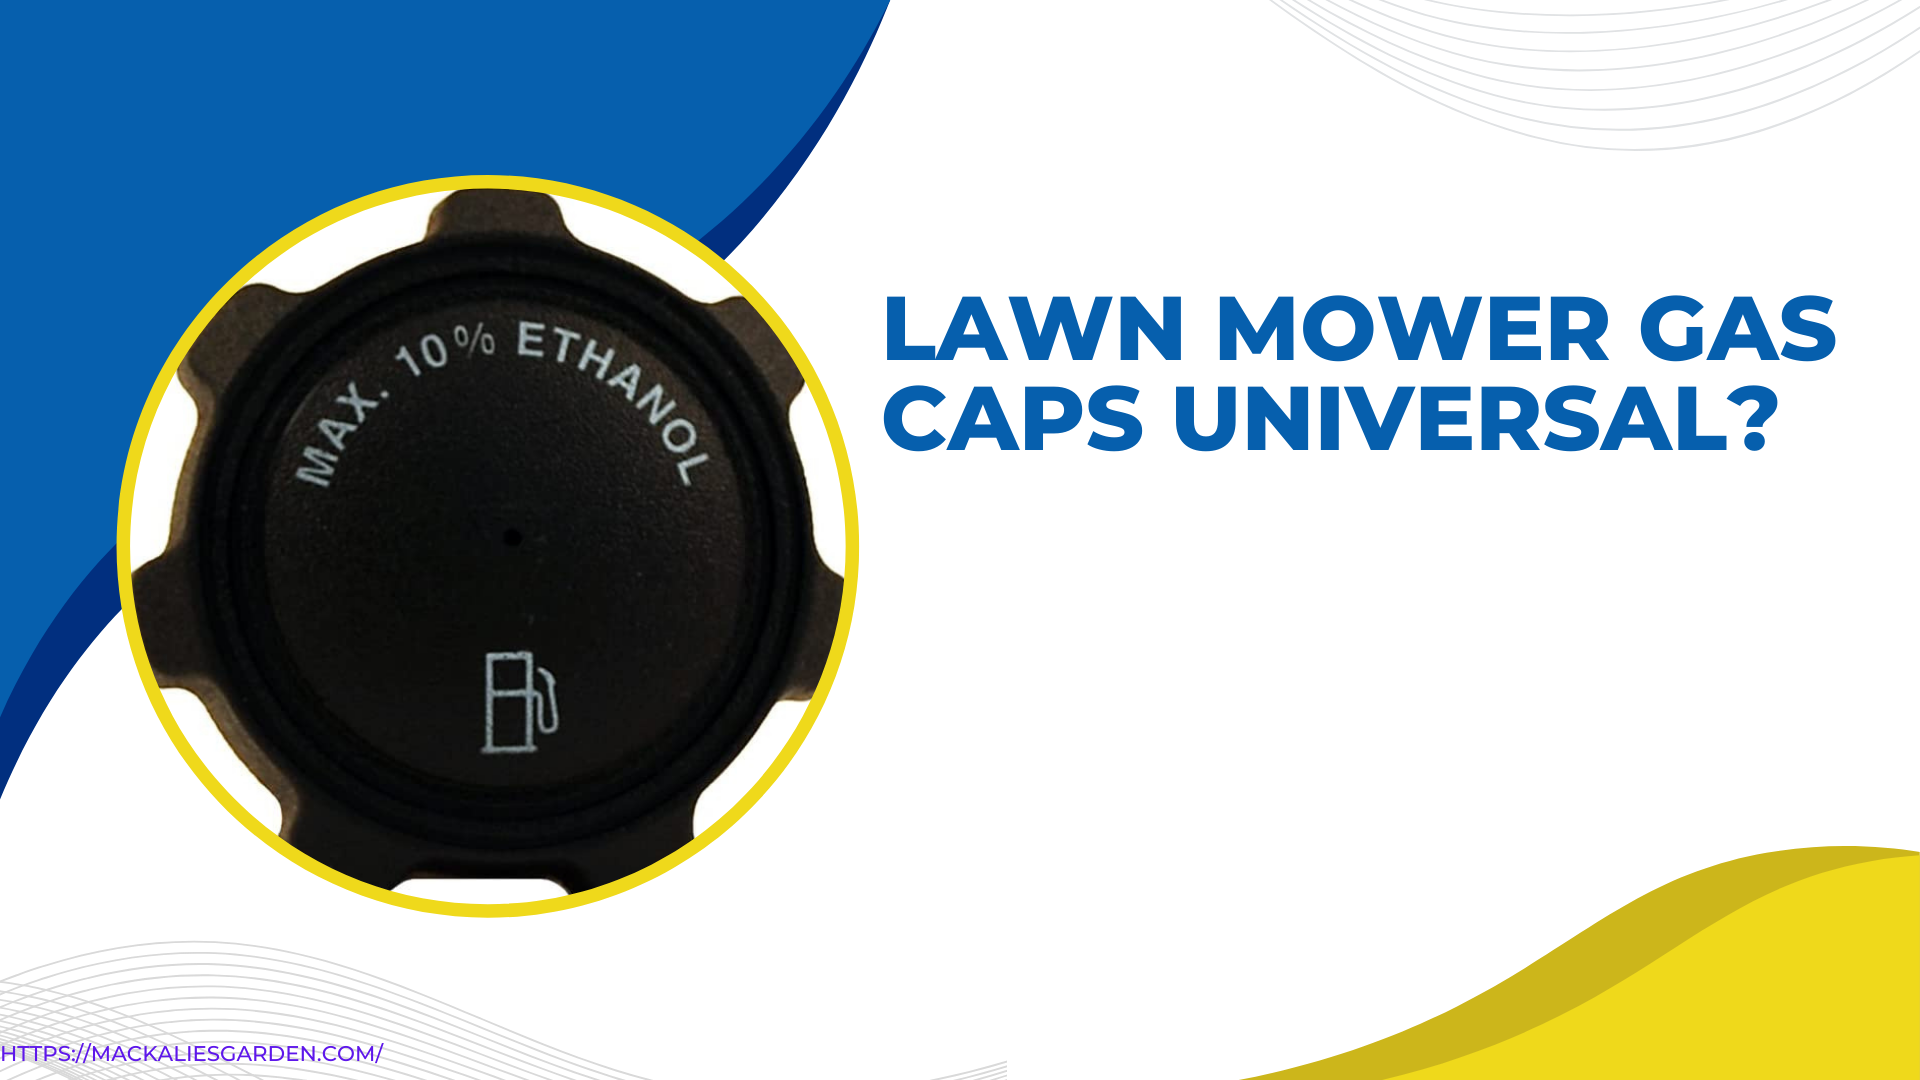 Are lawnmowers Gas Cap Universal?